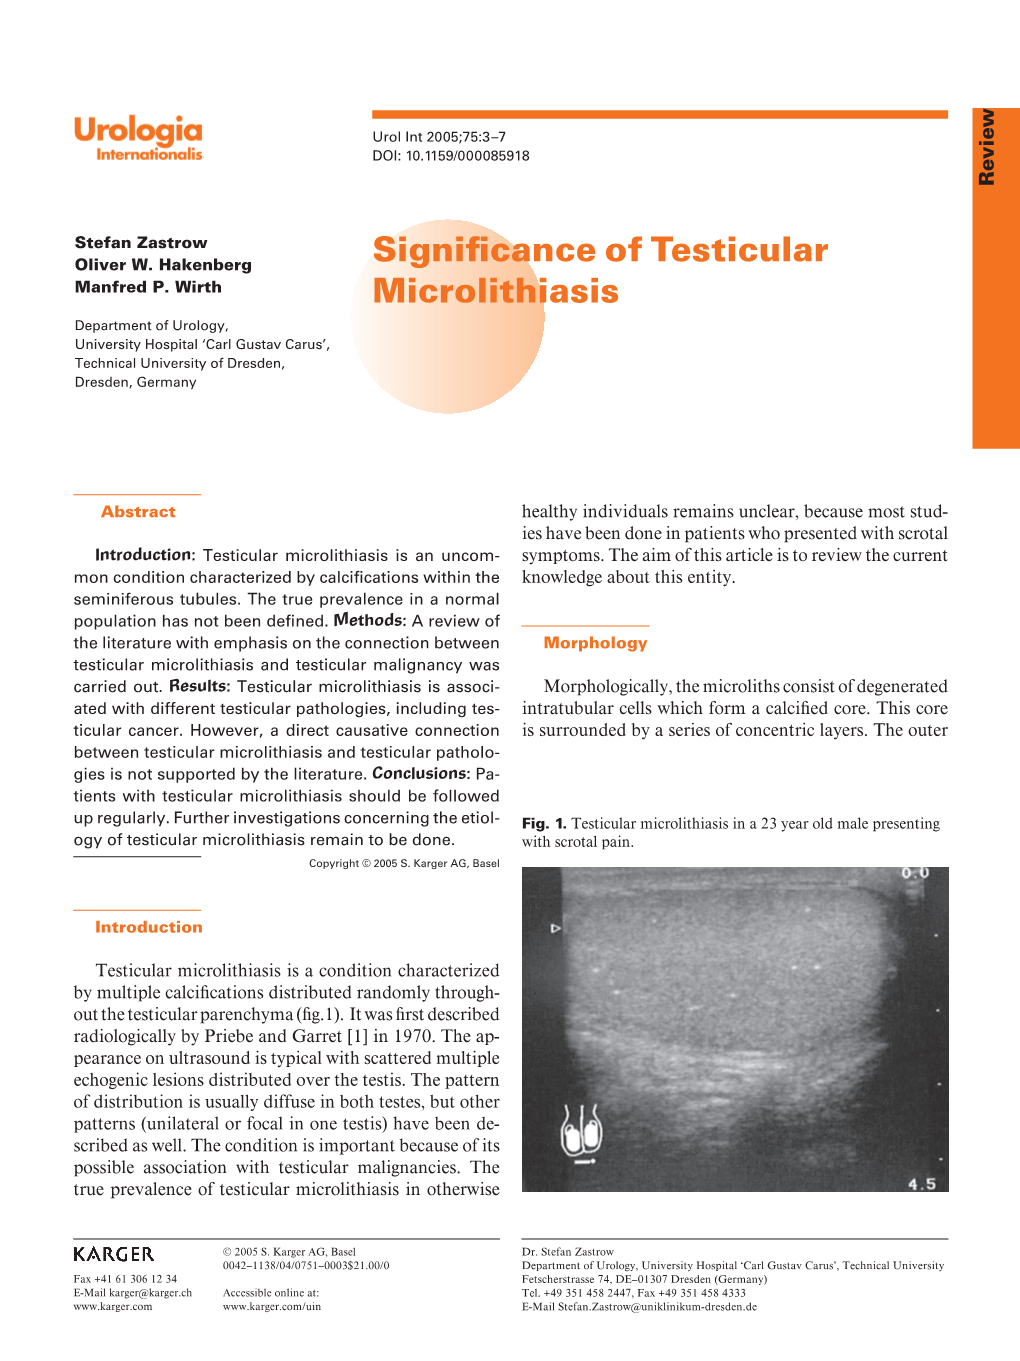 Significance of Testicular Microlithiasis